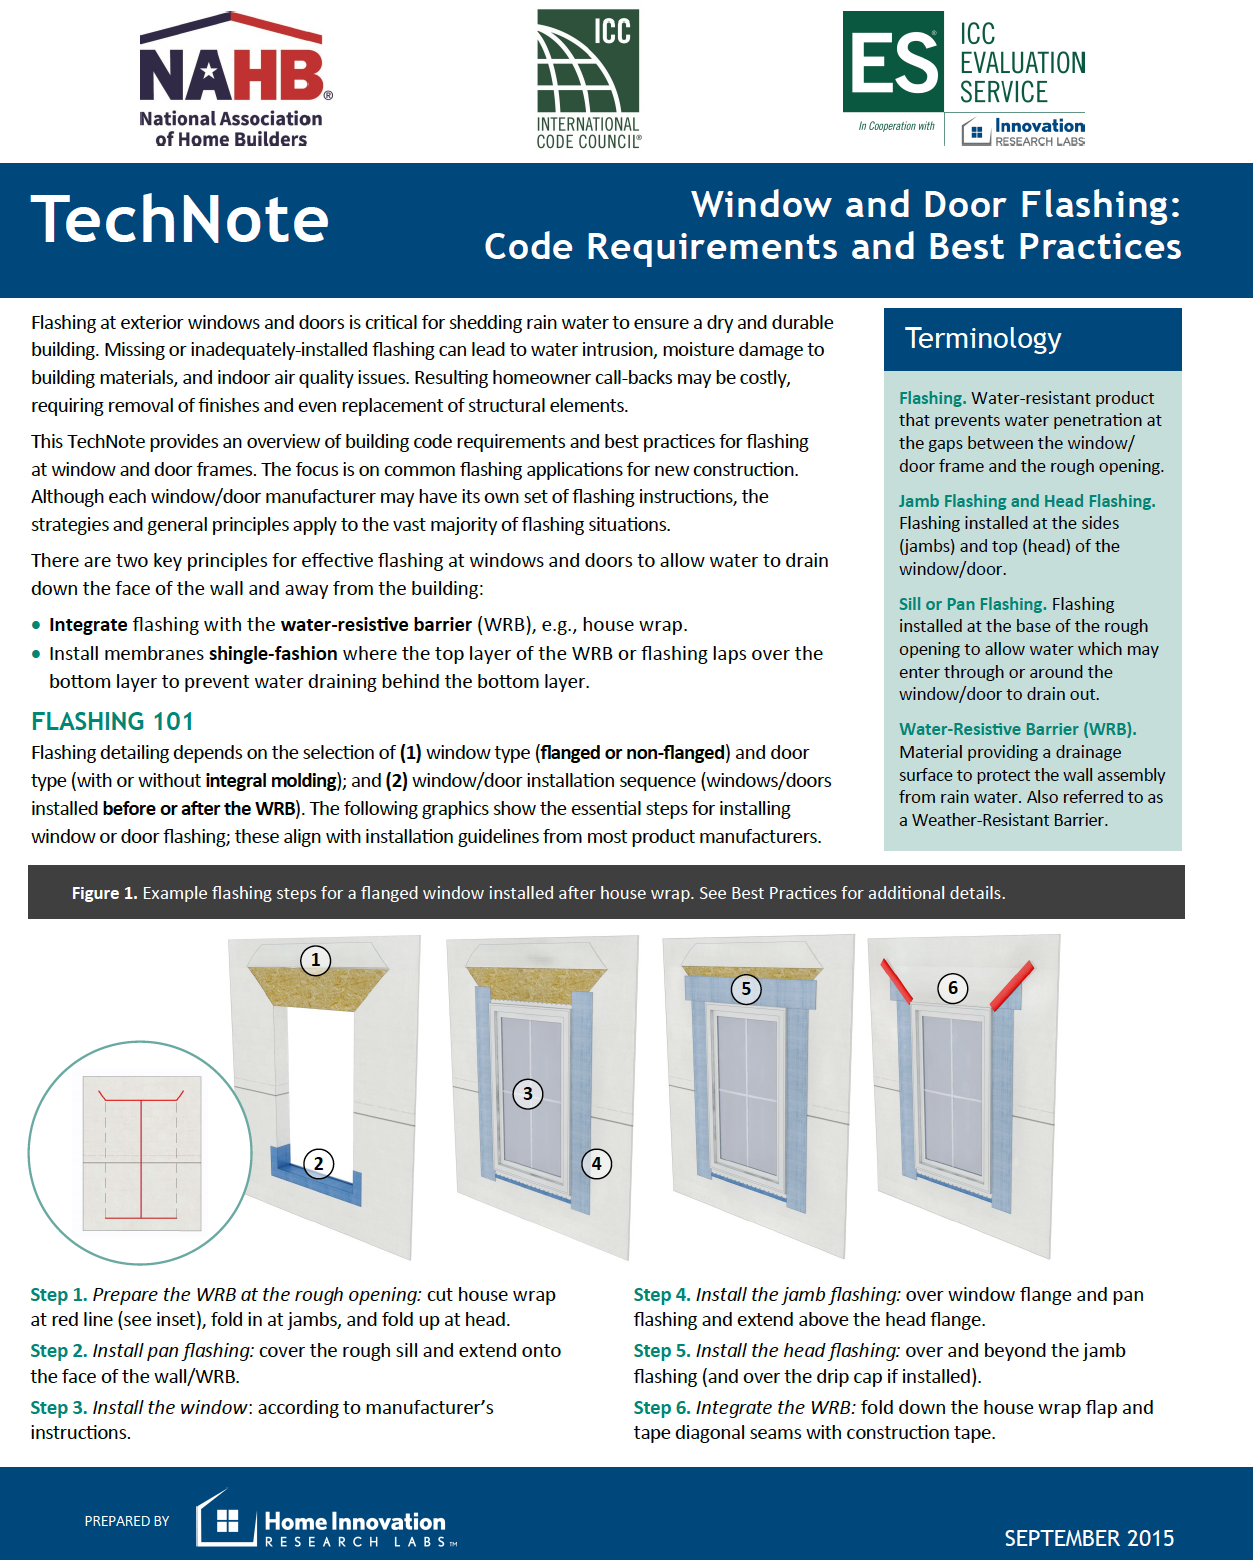 Cover page for a fact sheet by Home Innovation Research Labs on window and door flashing. 